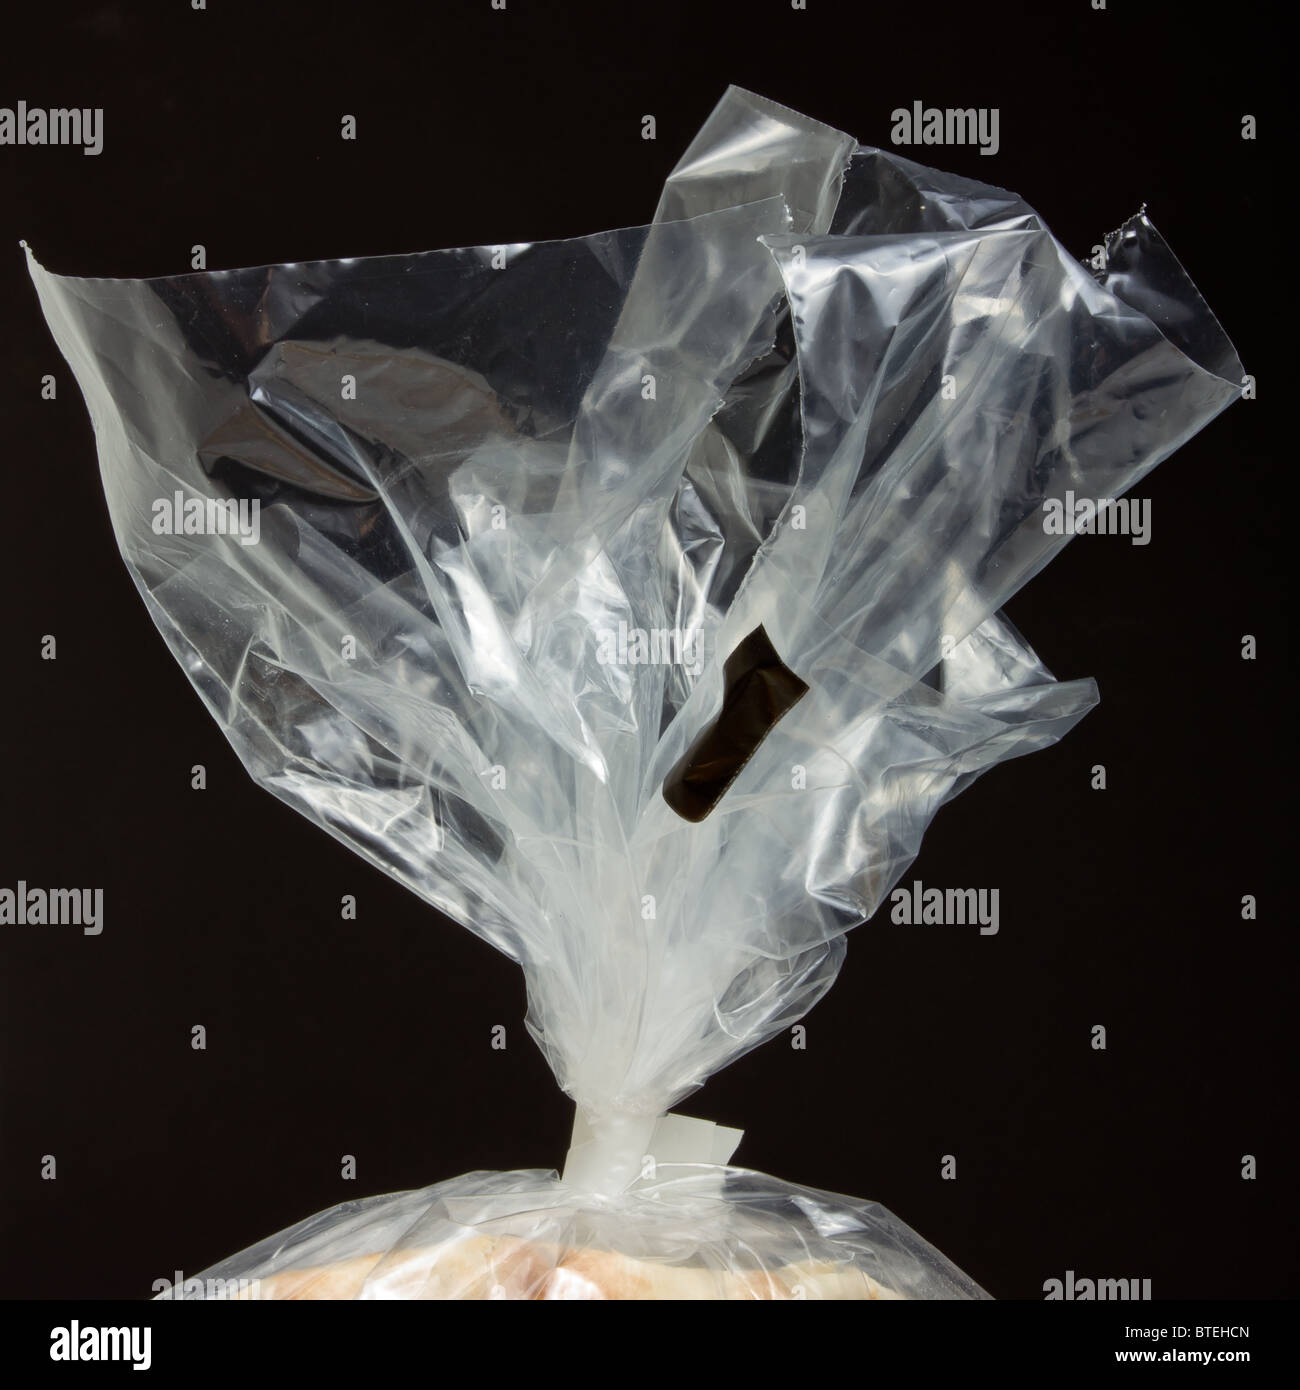 Neck of clear plastic food bag with tie against dark background. Stock Photo